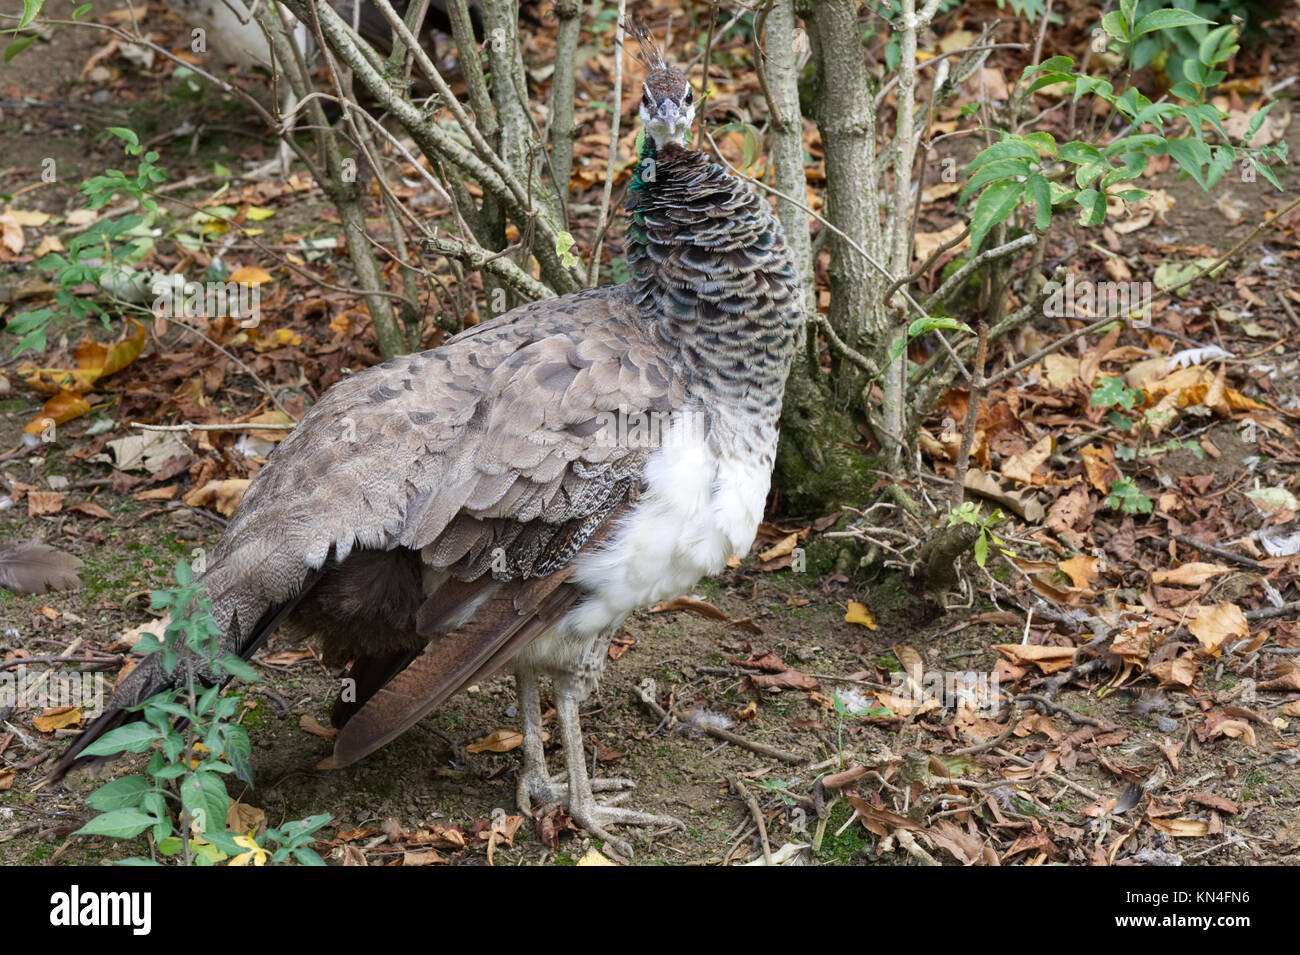 Peahen. Female Peacock in woodlands Stock Photo